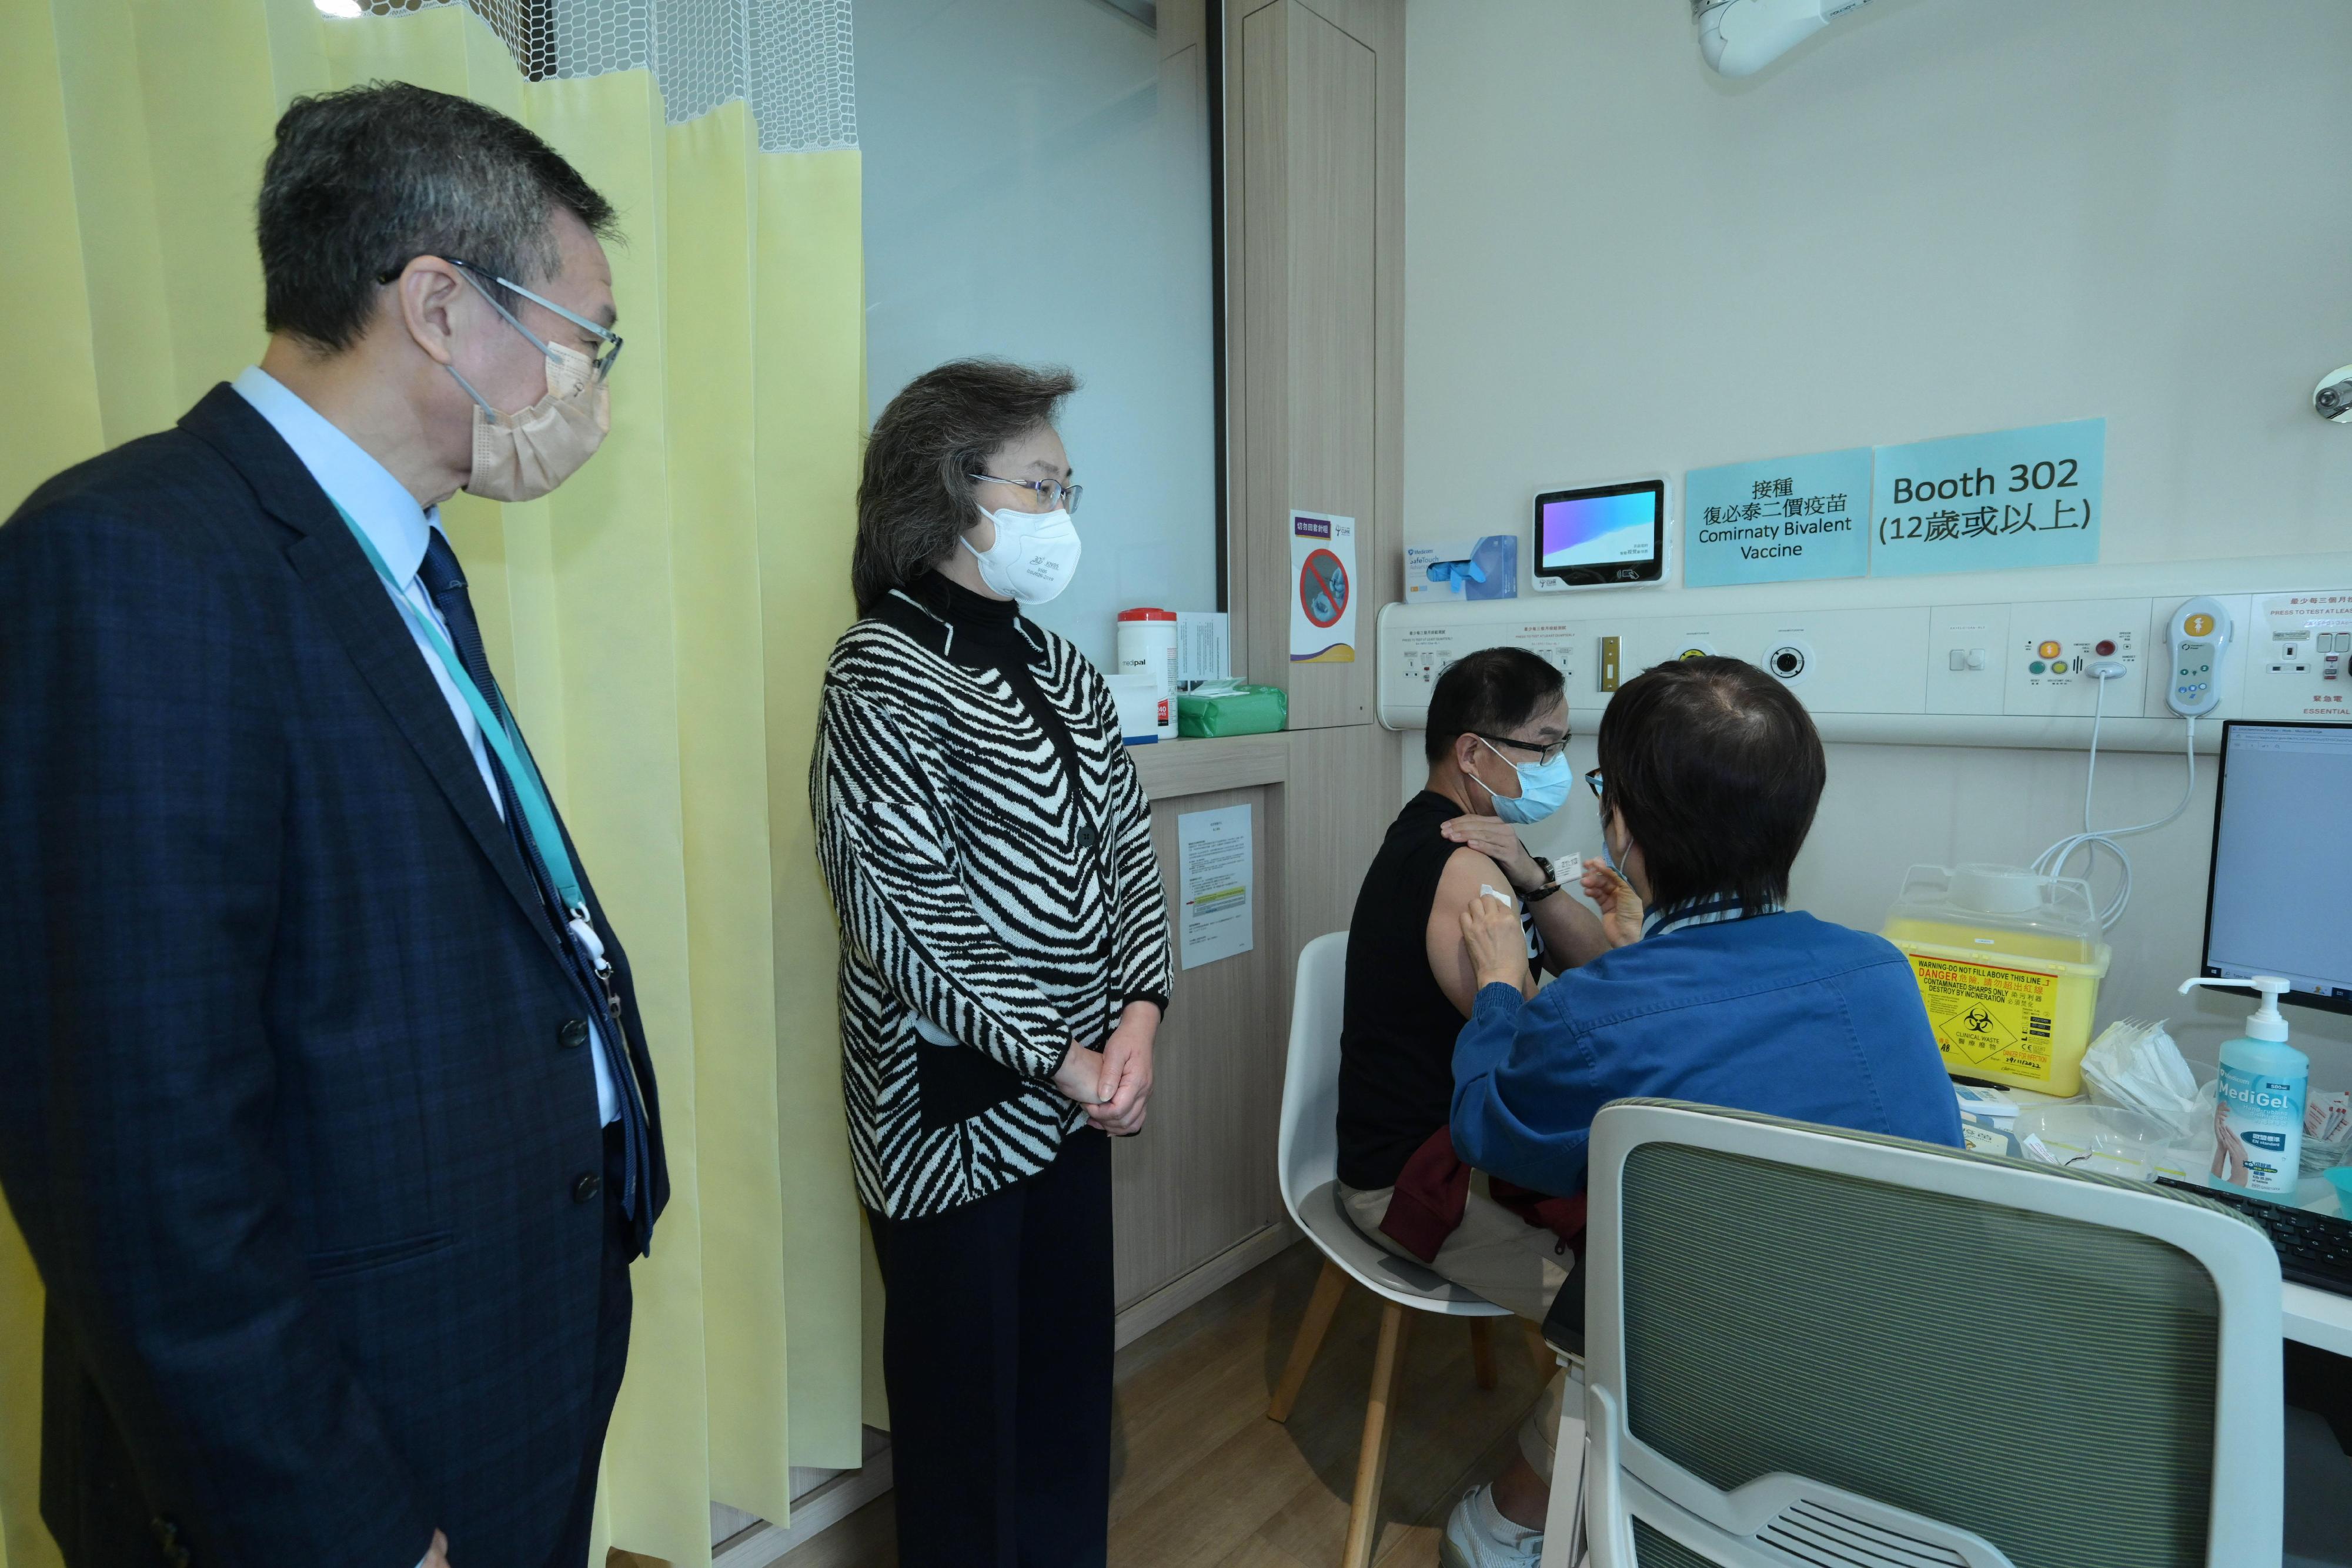 The Secretary for the Civil Service, Mrs Ingrid Yeung, visited the Community Vaccination Centre at CUHK Medical Centre today (December 1) to see for herself the BioNTech bivalent vaccination of the public and learn about the views of the vaccine recipients. Photo shows a 68-year-old man (second right) receiving the BioNTech bivalent vaccine. He also received the seasonal influenza vaccine at the same time today. Looking on are Mrs Yeung (second left) and the Chief Executive Officer of the CUHK Medical Centre, Dr Fung Hong (first left).